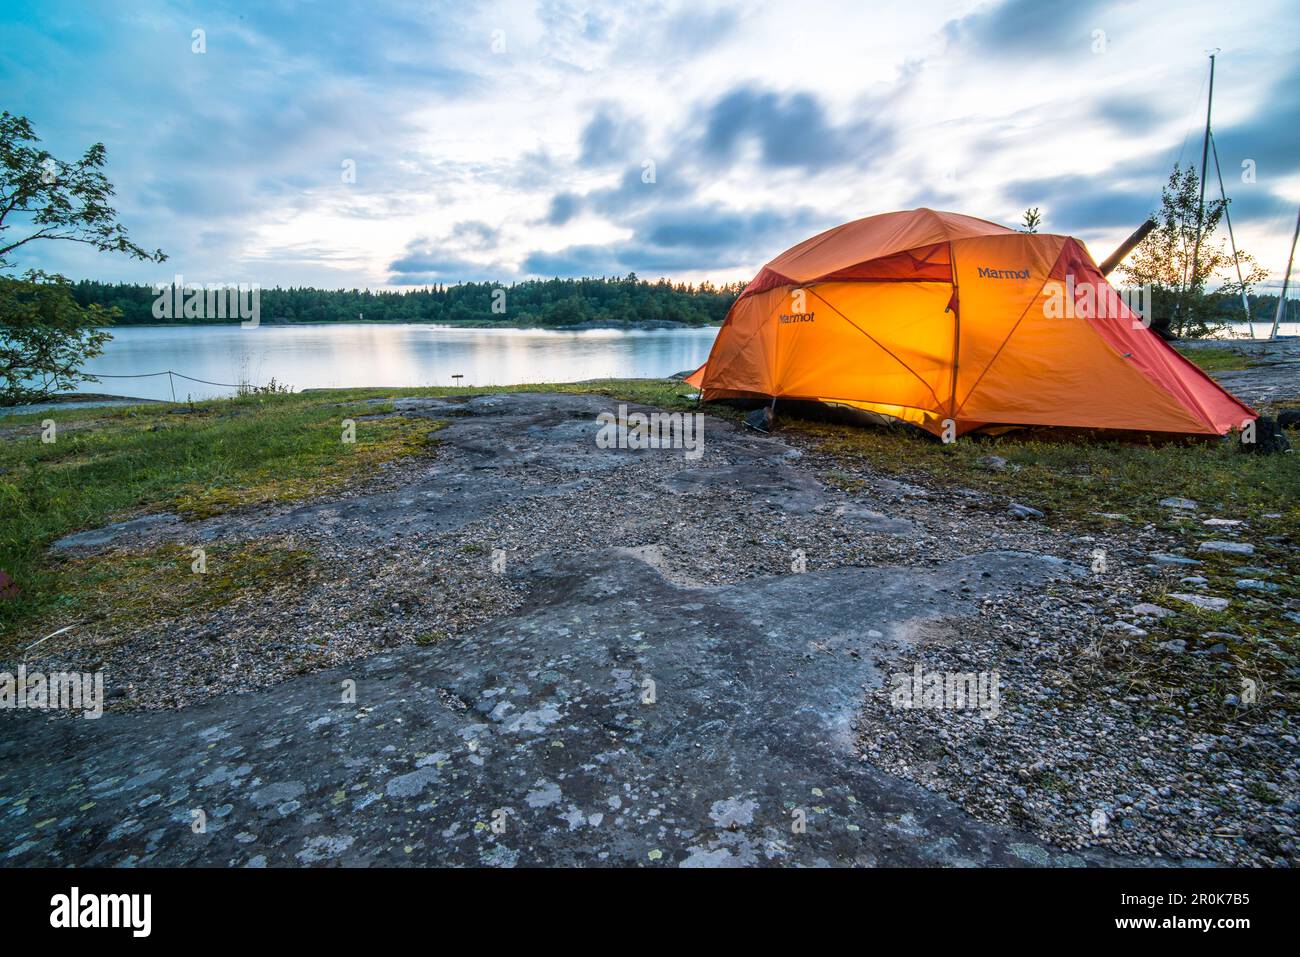 On  the rocks next to the water stands the orange glowing tent in the evening light, Anskarsclub, Oregrund, Uppsala, Sweden Stock Photo